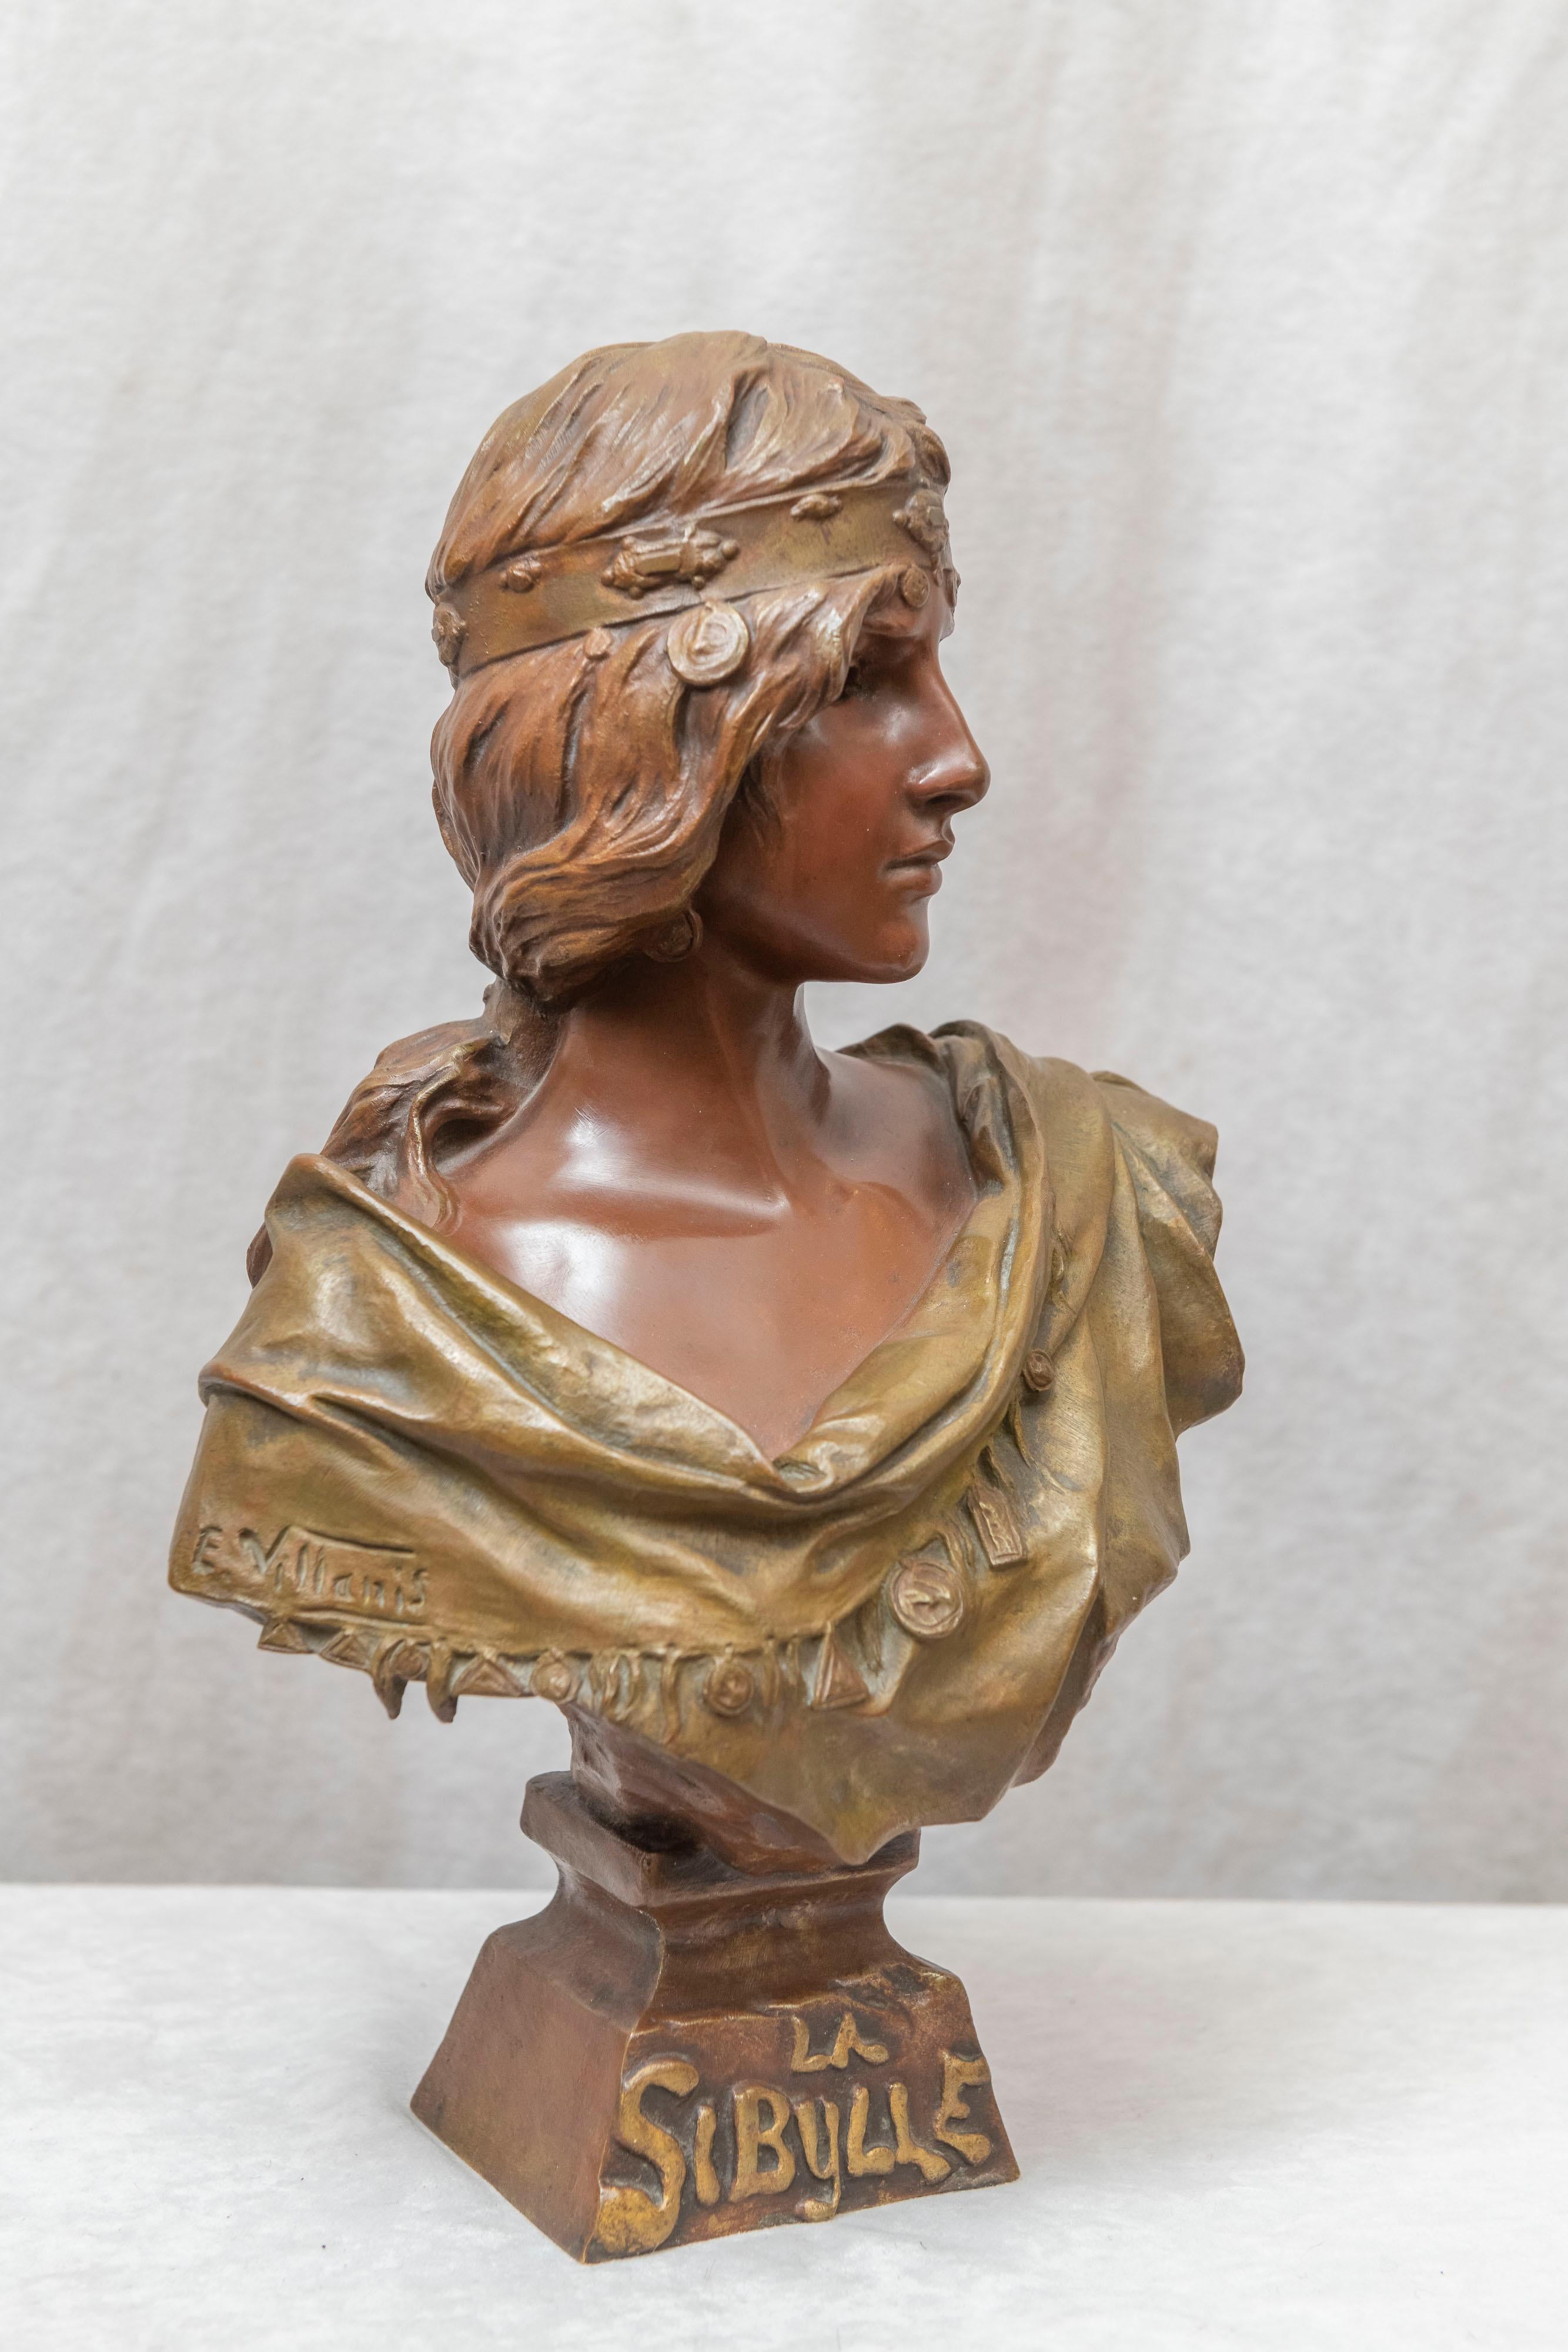 We are bronze dealers, and we always have at least 100 bronzes in the shop at all times. We buy very few busts, but this one spoke to us. The maiden is so beautiful, coupled with the rich 2 color patina, Her skin being brown and the clothes are